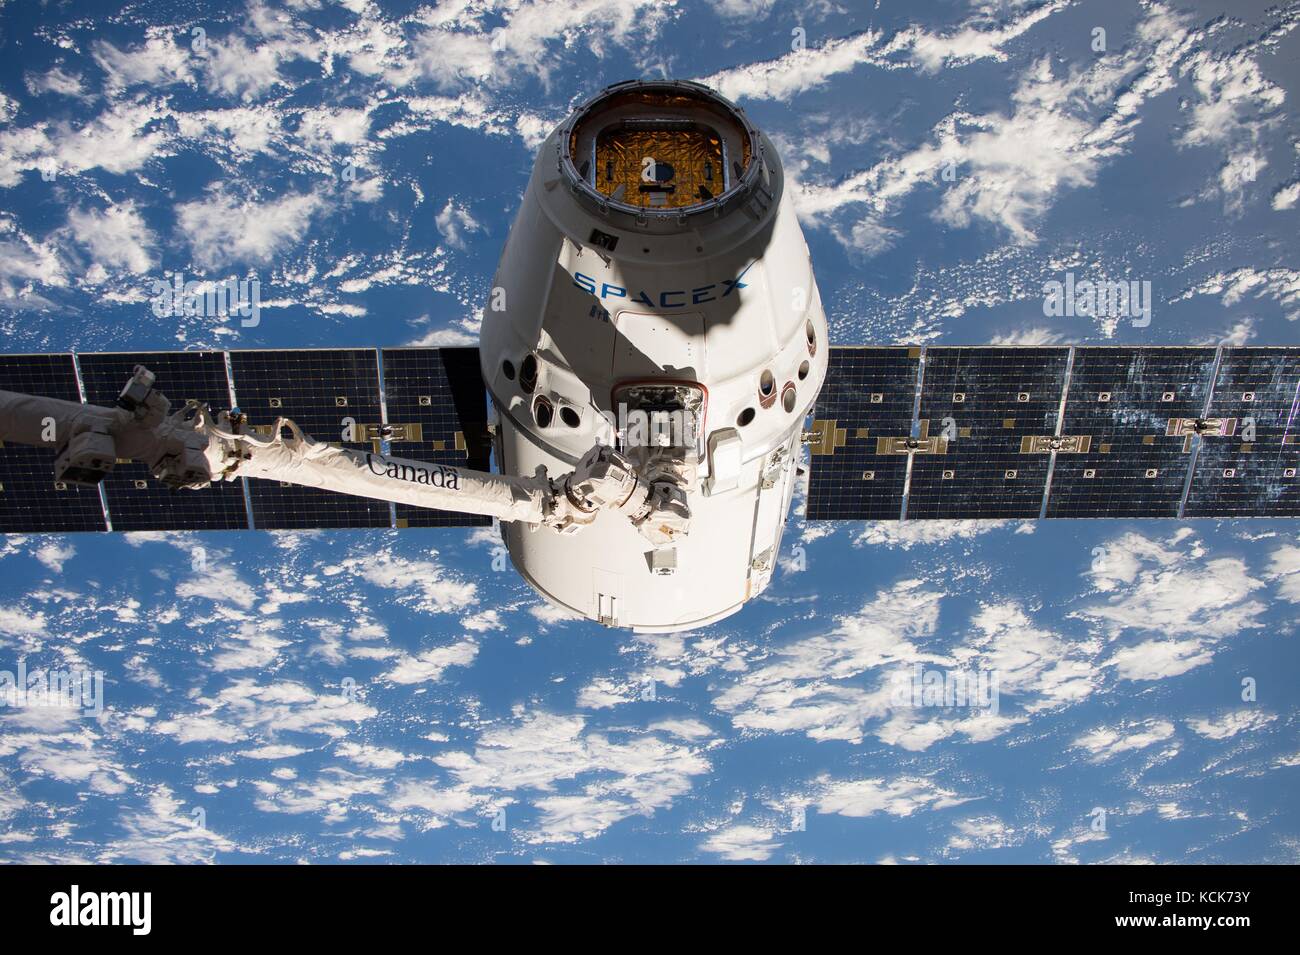 The NASA International Space Station Canadarm2 robotic arm captures the incoming SpaceX Dragon cargo spacecraft during a resupply mission June 5, 2017 in Earth orbit.  (photo by NASA Photo  via Planetpix) Stock Photo